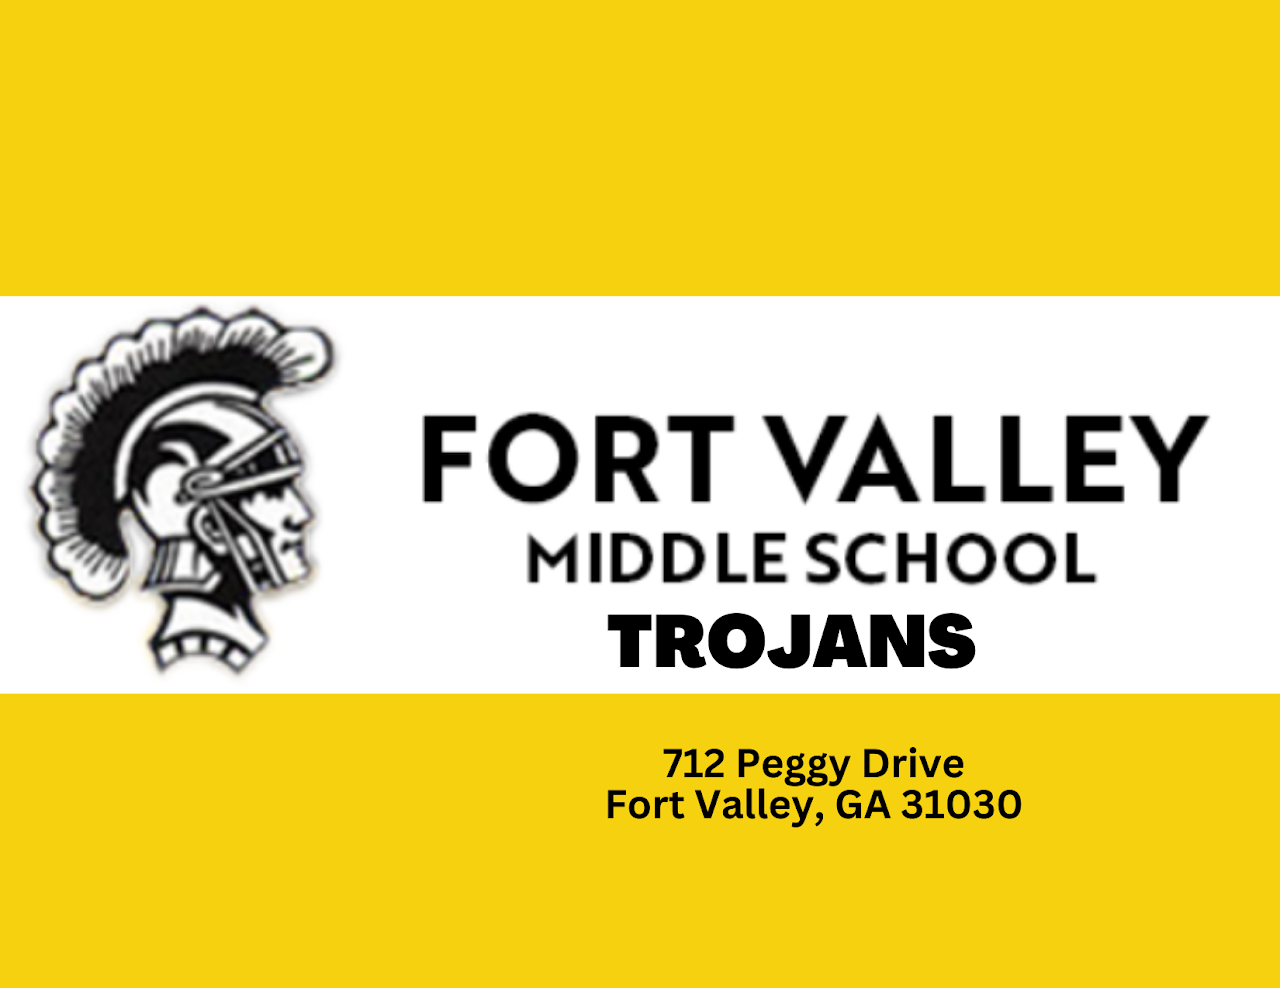 Fort Valley Middle School